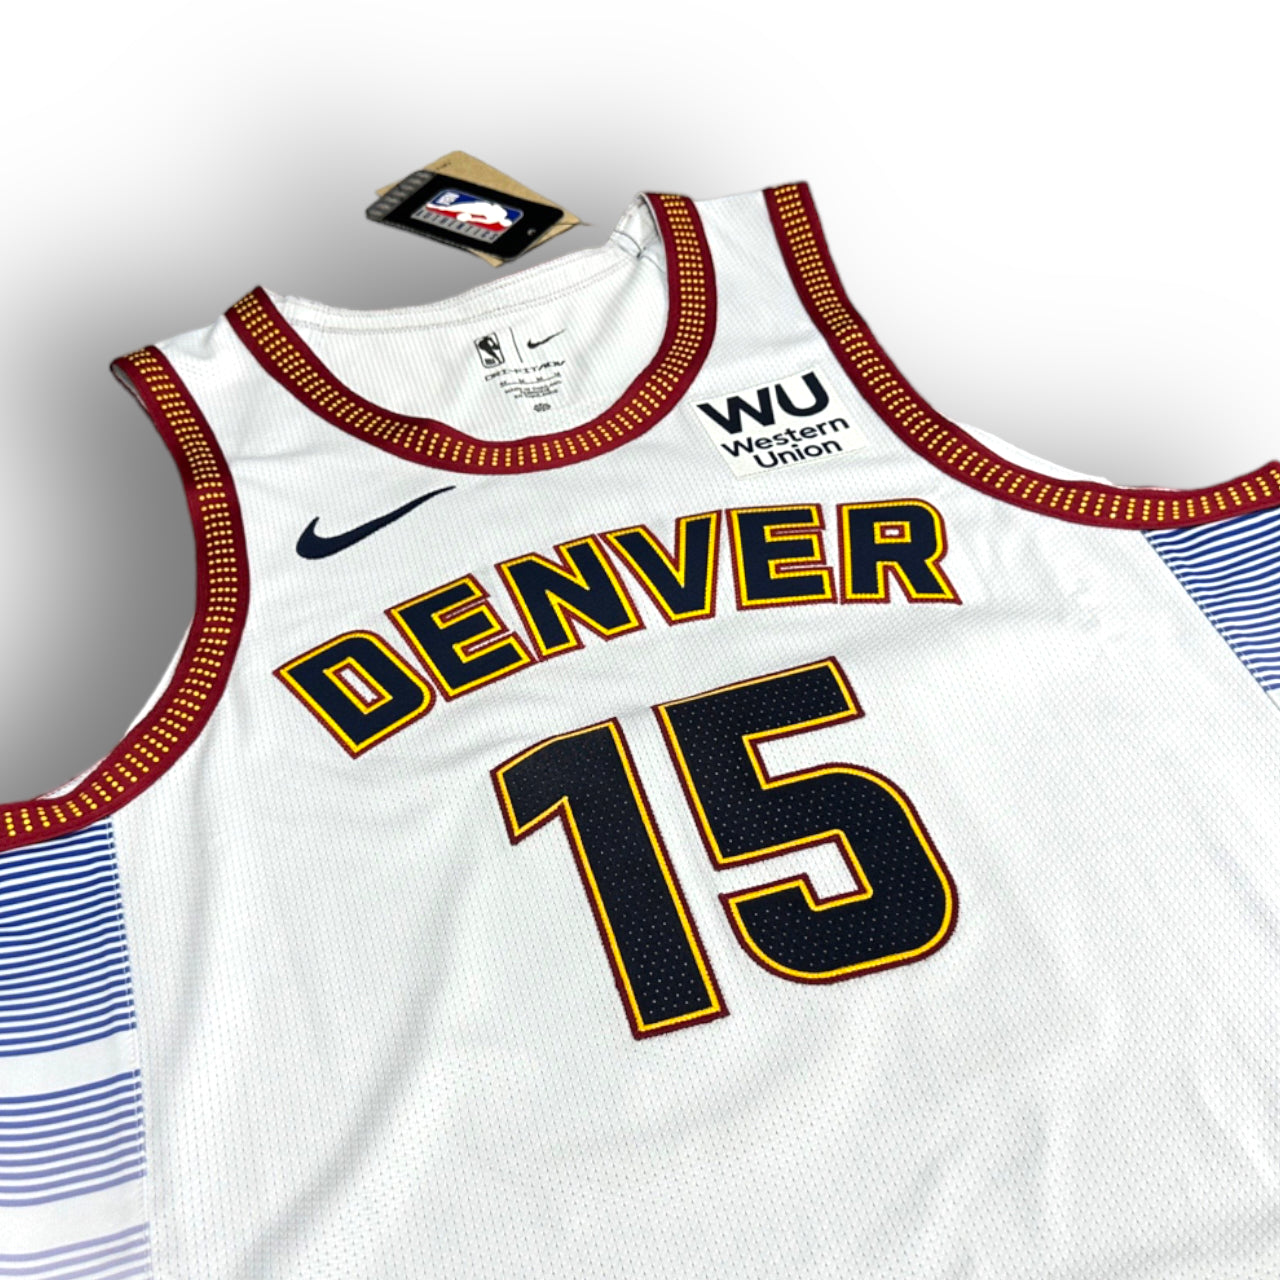 Nikola Jokic Denver Nuggets 2022-2023 City Edition Nike Authentic Jersey - White (with "Western Union Patch") - Hoop Jersey Store